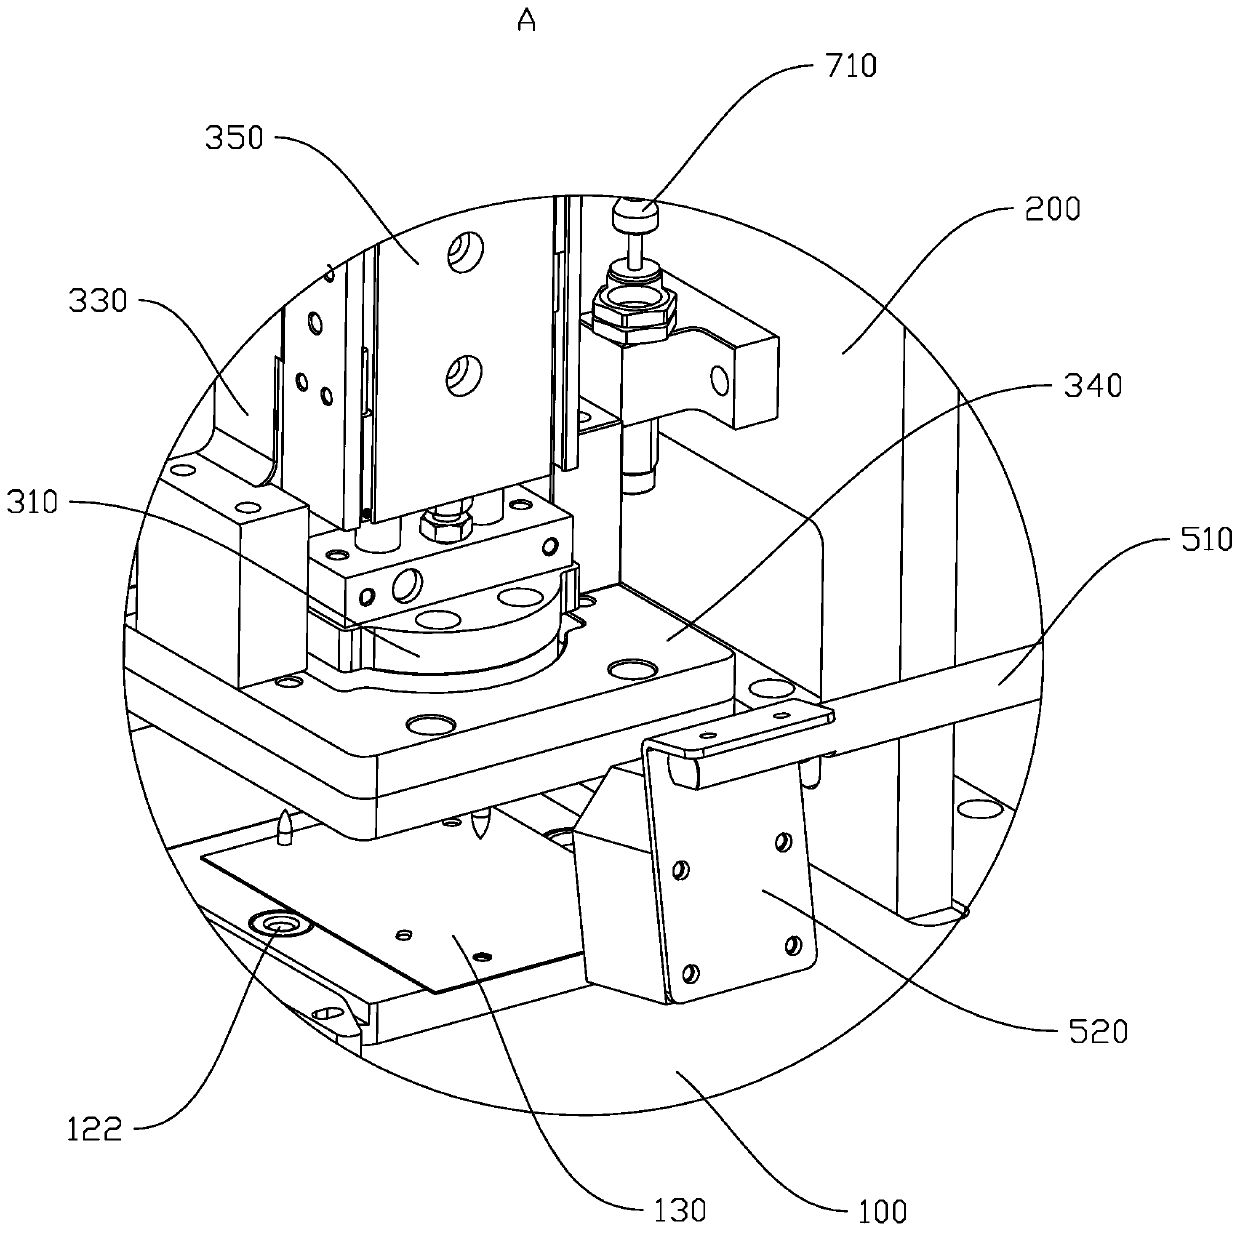 Semi-automatic assembling mechanism for transfer laminating of flaky material